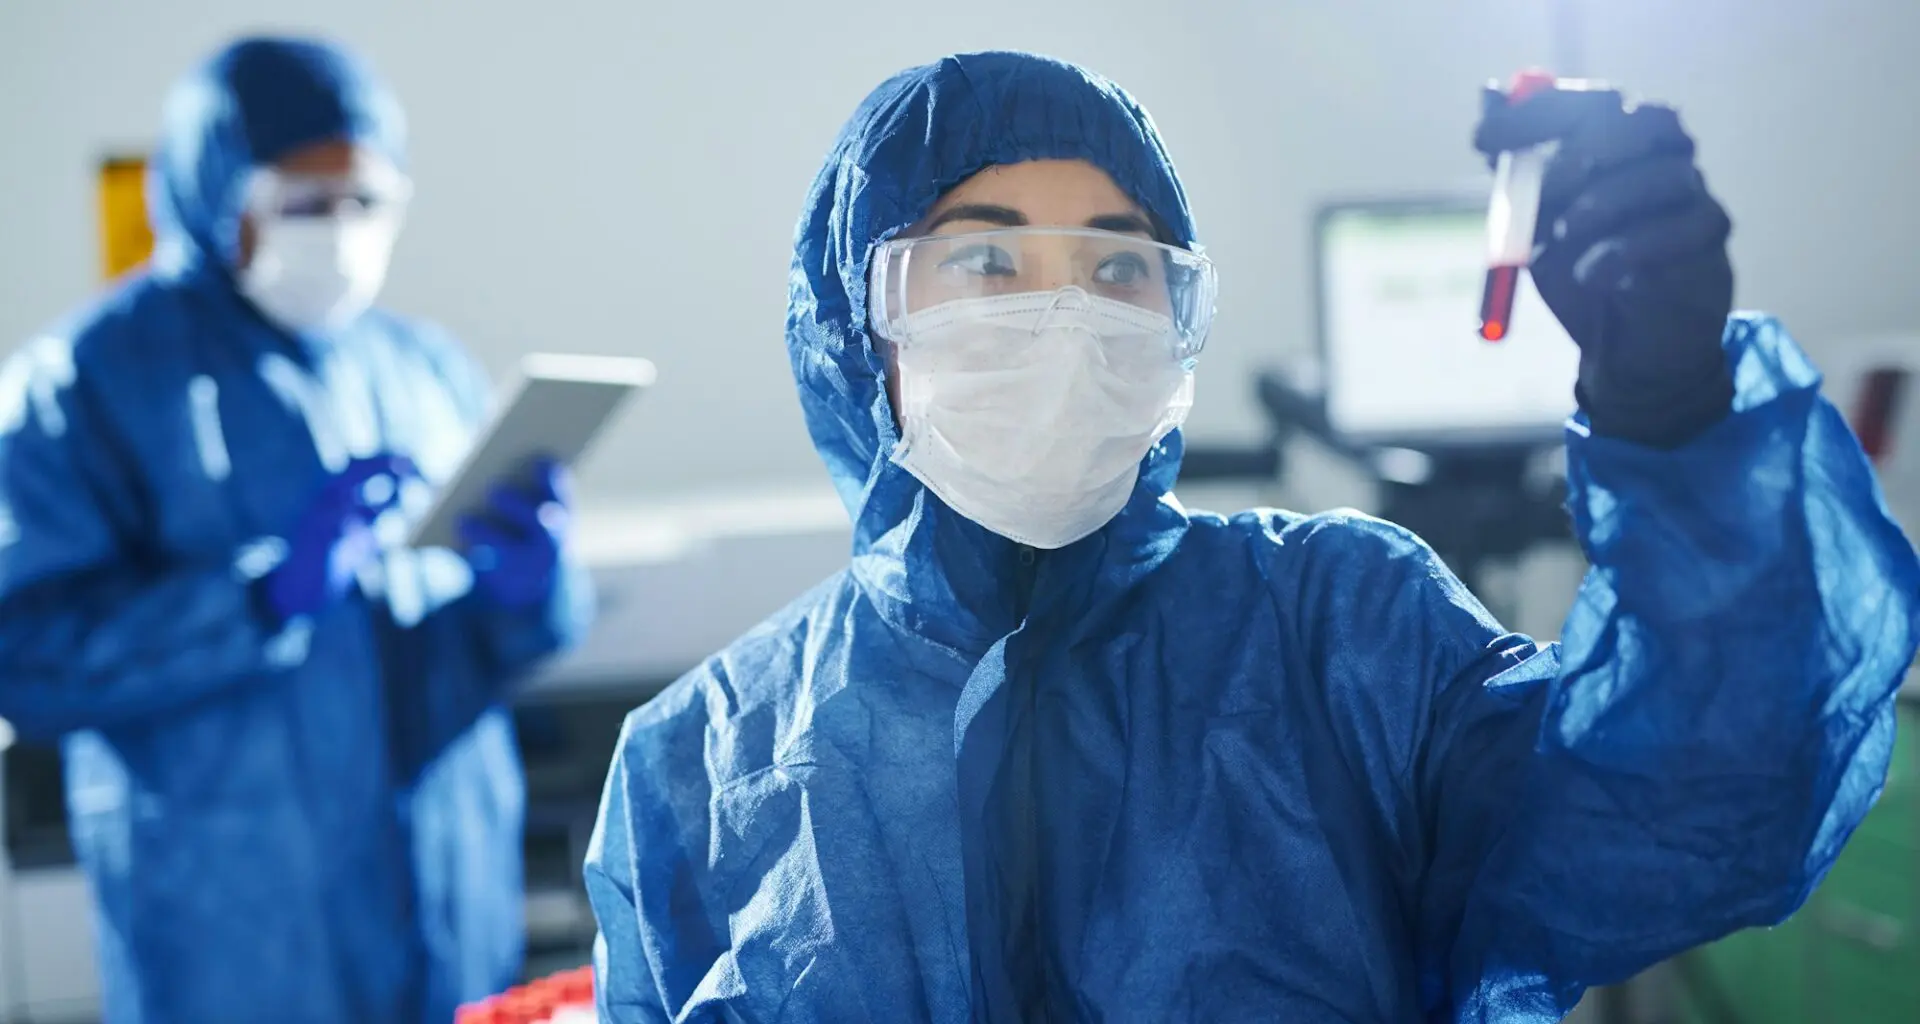 Two healthcare professionals in blue protective suits, masks, and gloves, working in a laboratory.